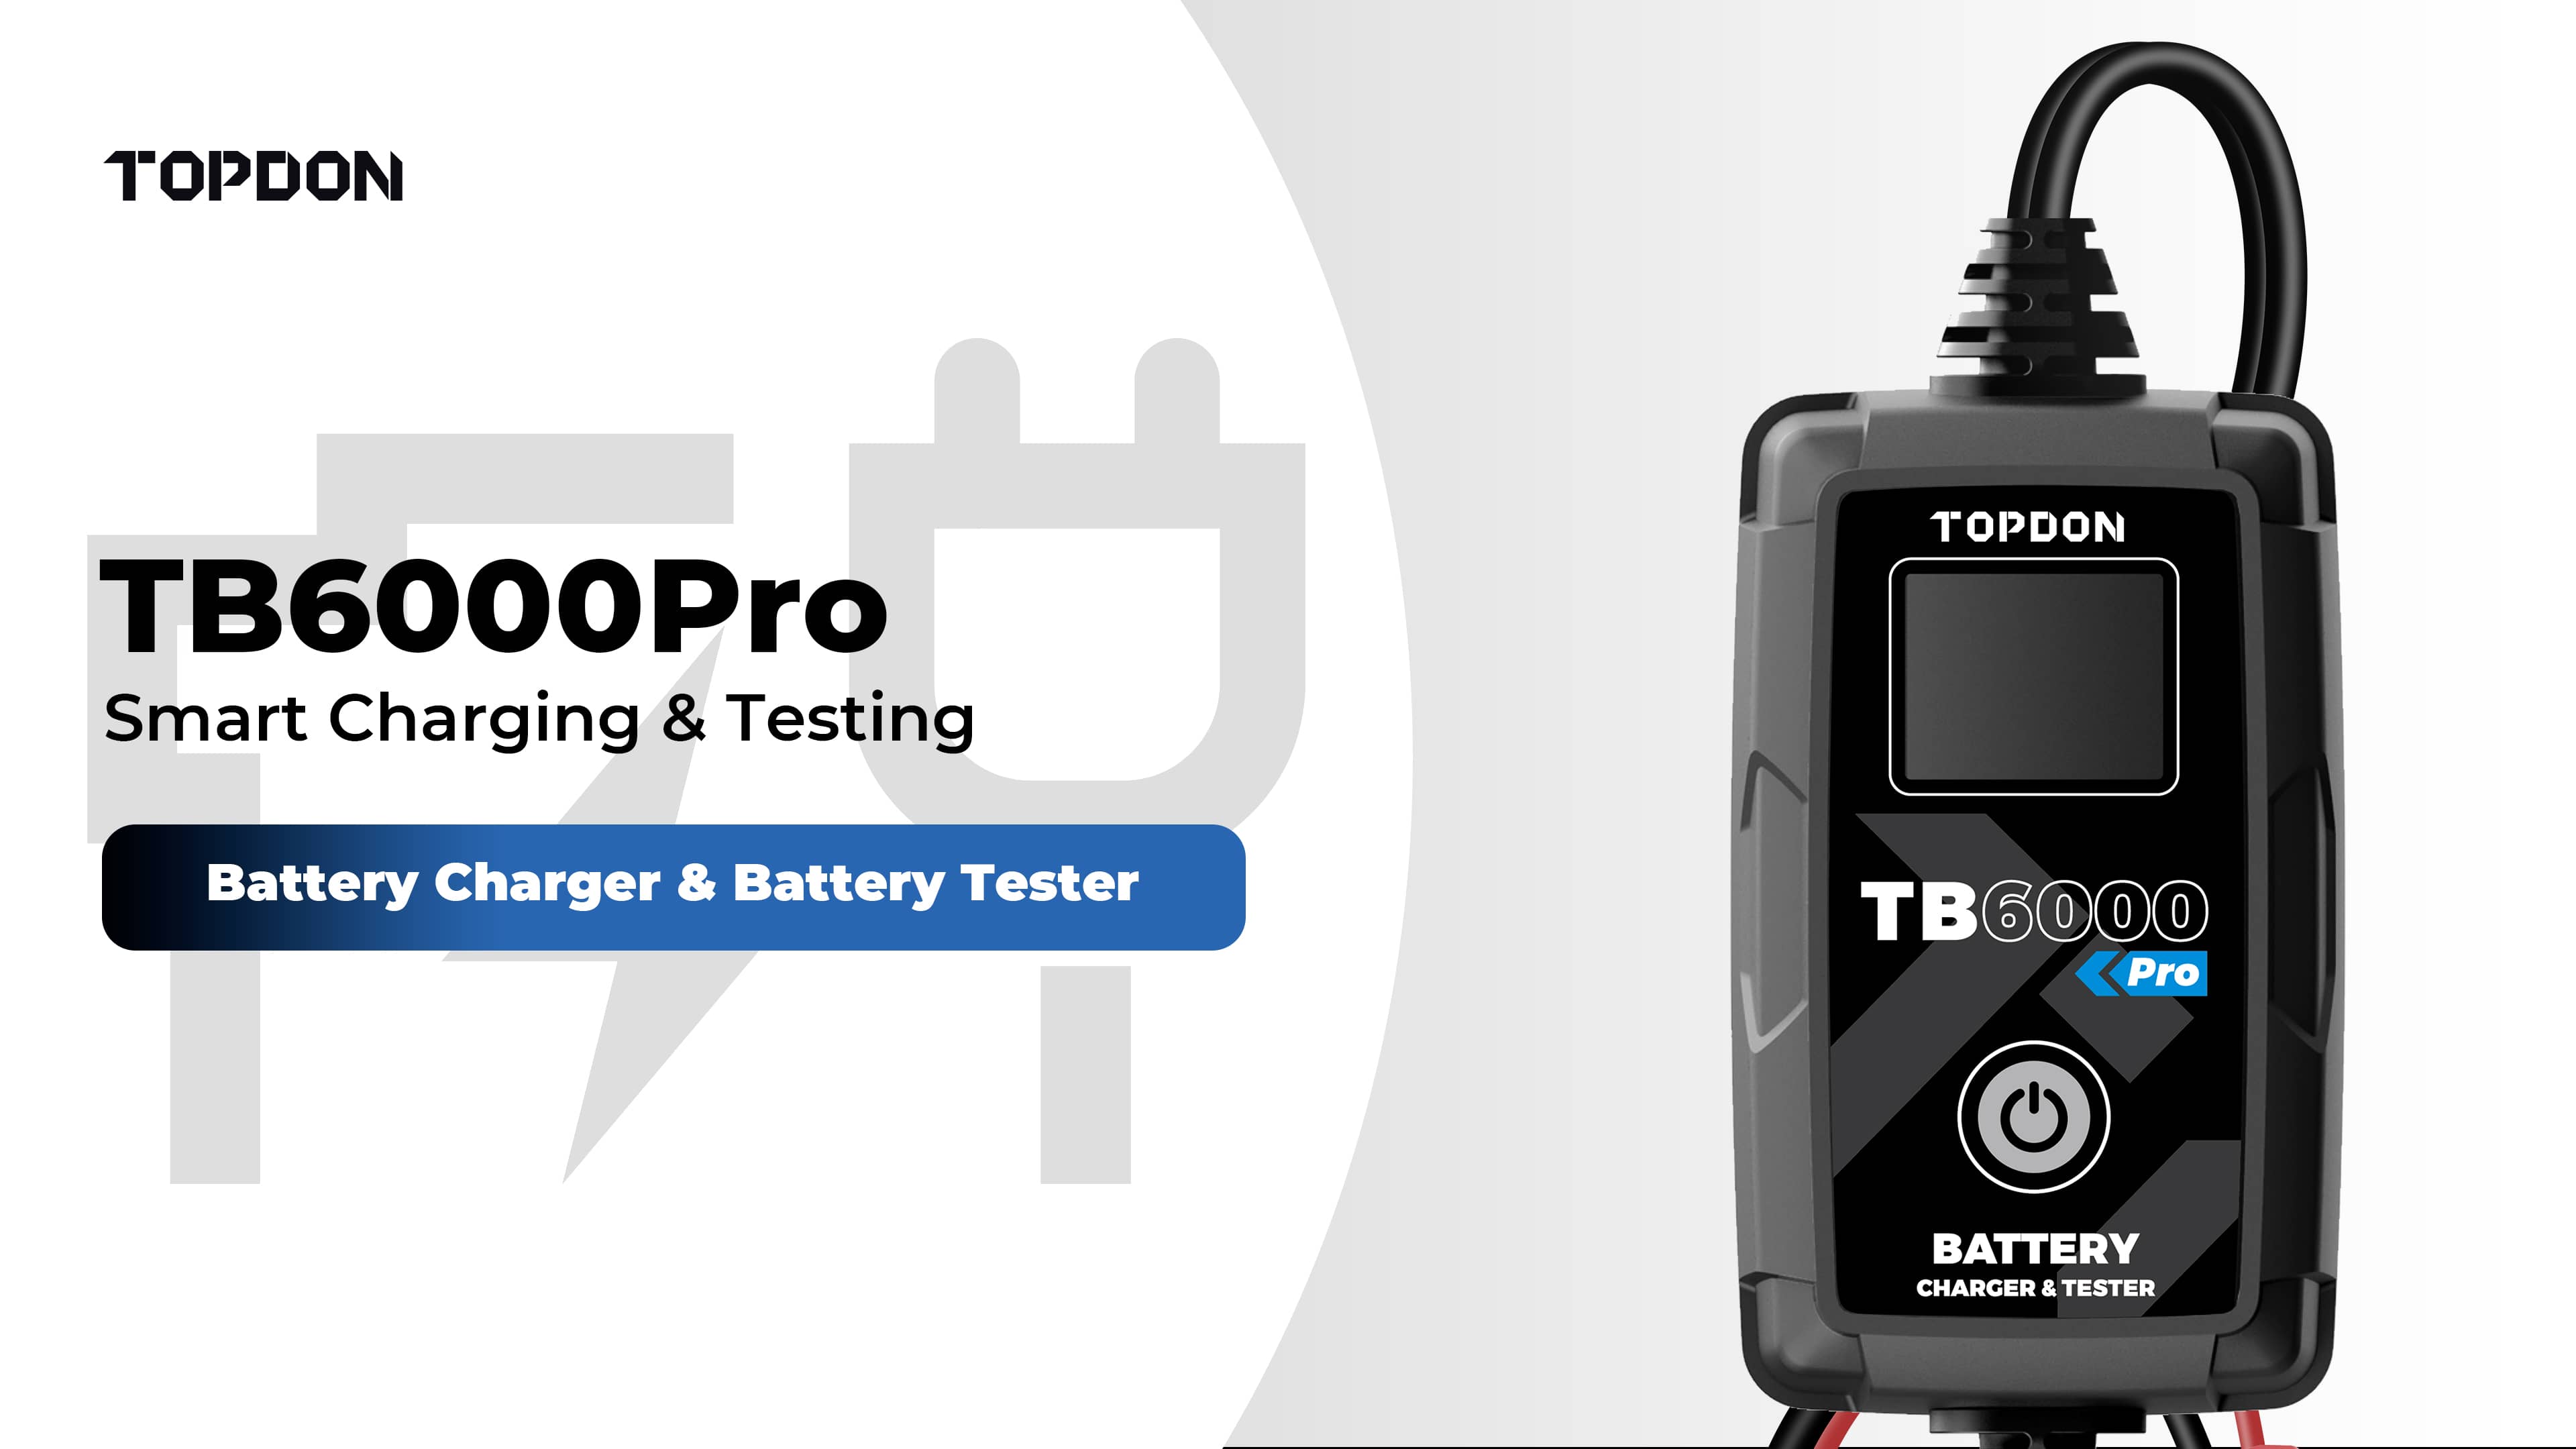 TOPDON TB6000Pro | 2-in-1 Smart Battery Charger and Tester